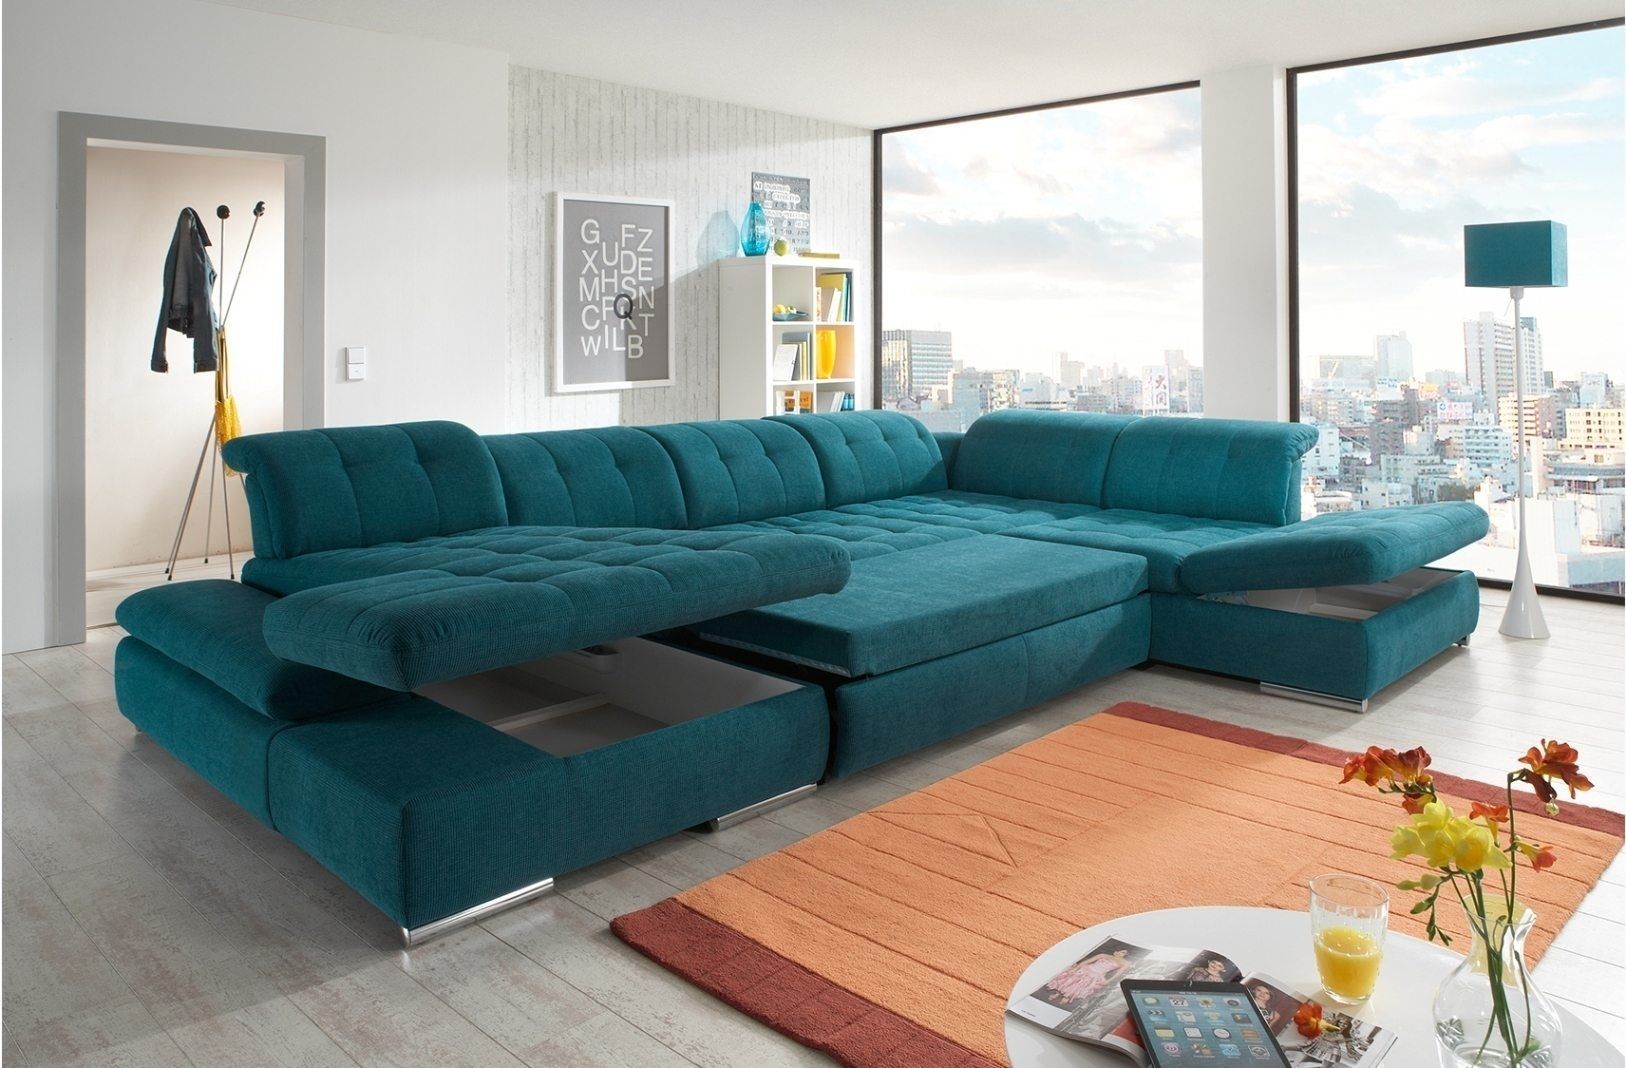 Sectional Sofa : Leather Sectional With Chaise And Recliner Deep Pertaining To Deep Seating Sectional Sofas (View 3 of 10)